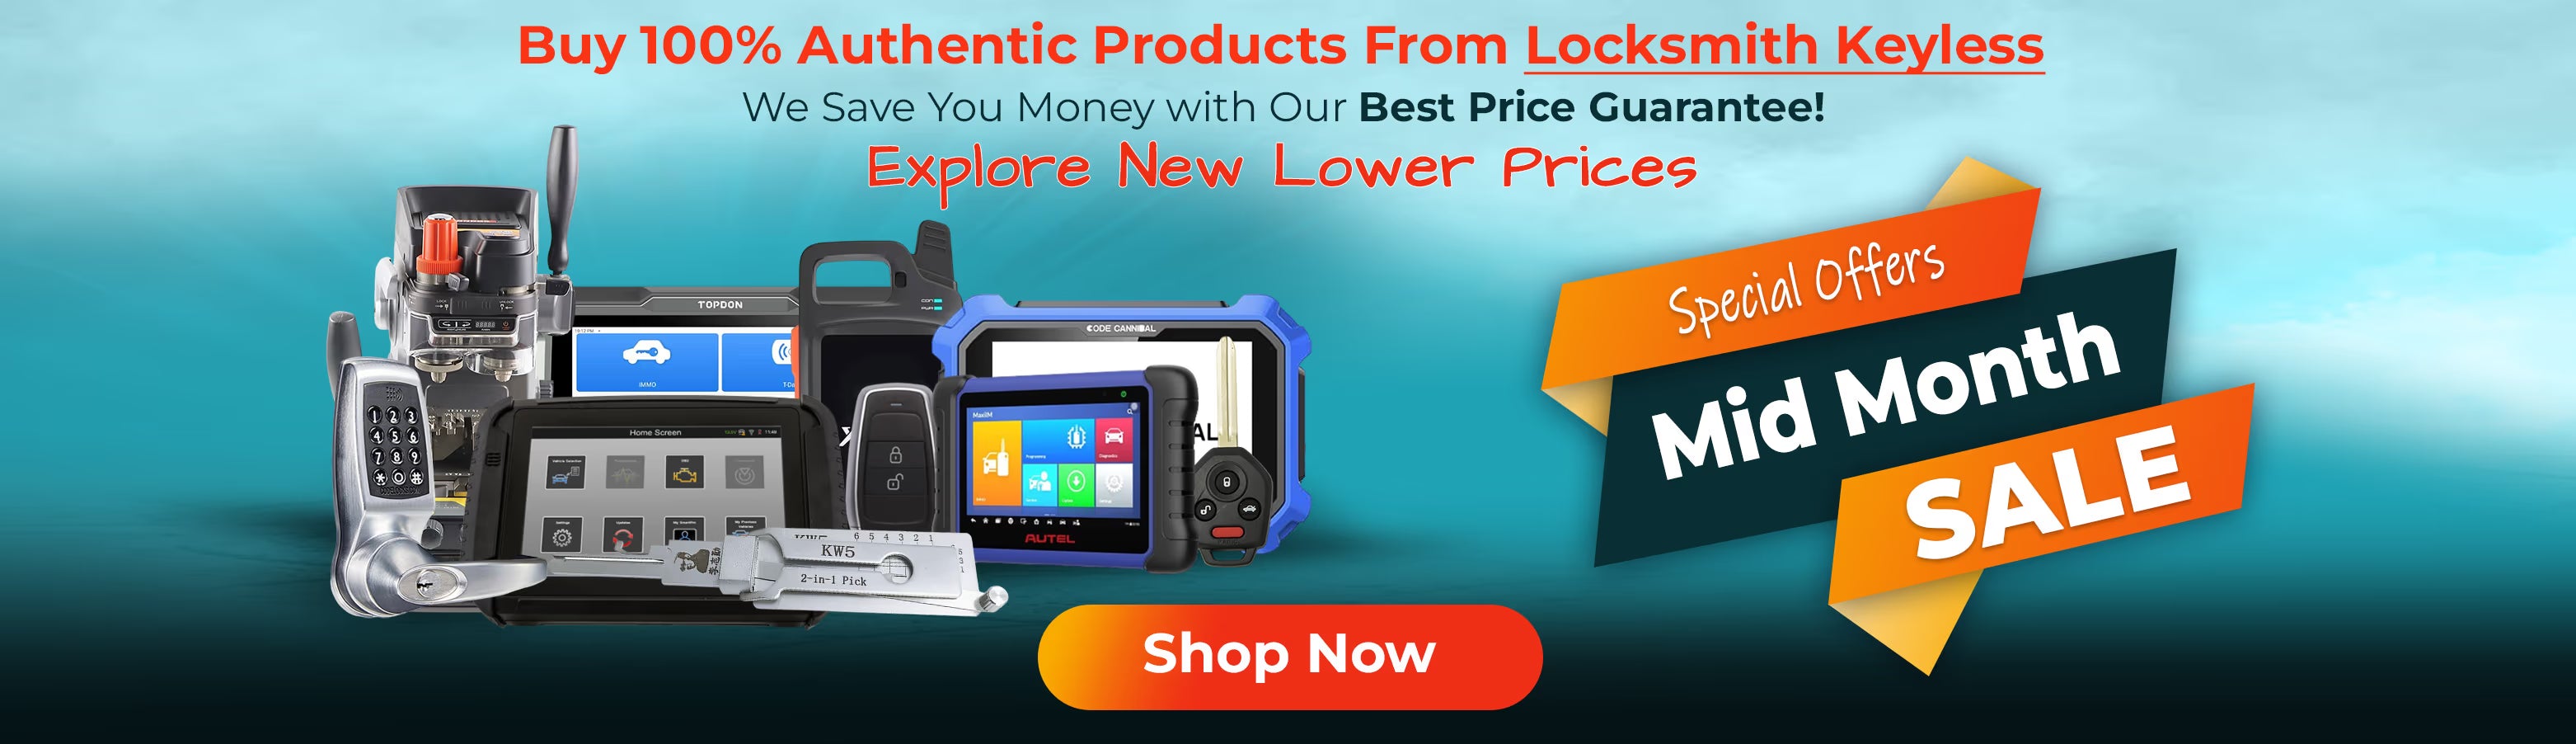  Clearance Blowout Sale Event Locksmith Keyless